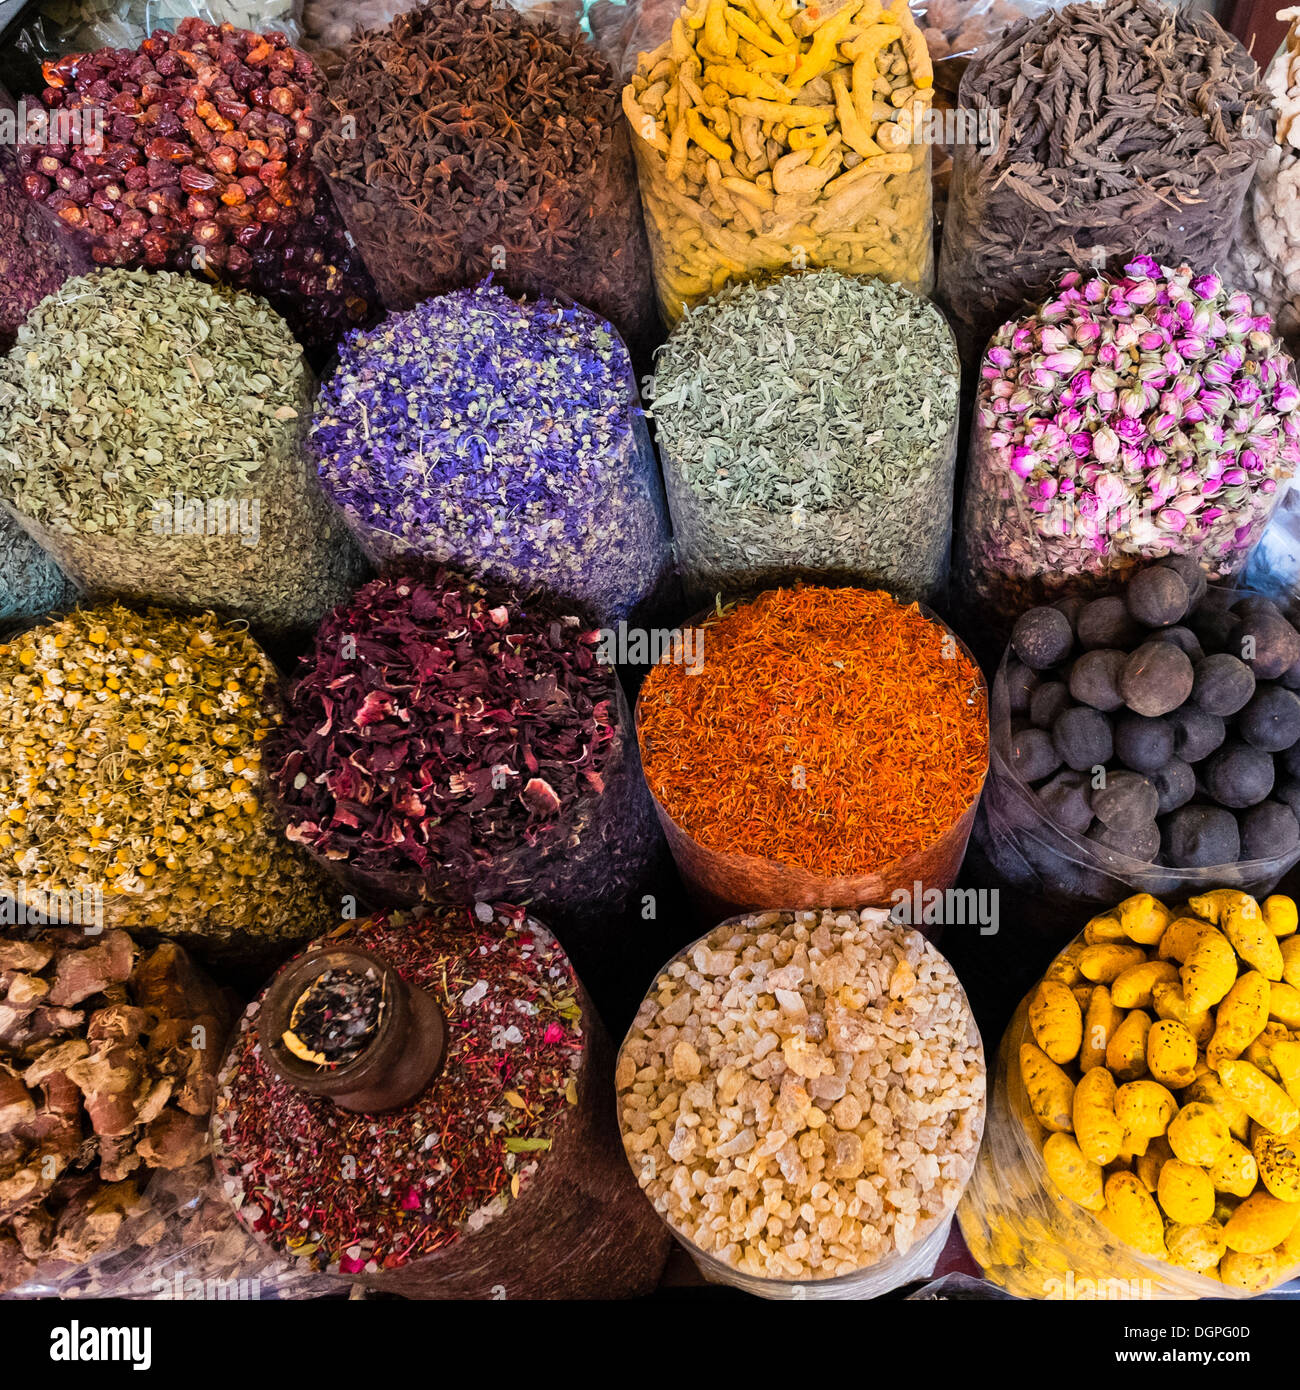 Spices and herbs for sale at Spice Souk in Deira Dubai United Arab Emirates Stock Photo